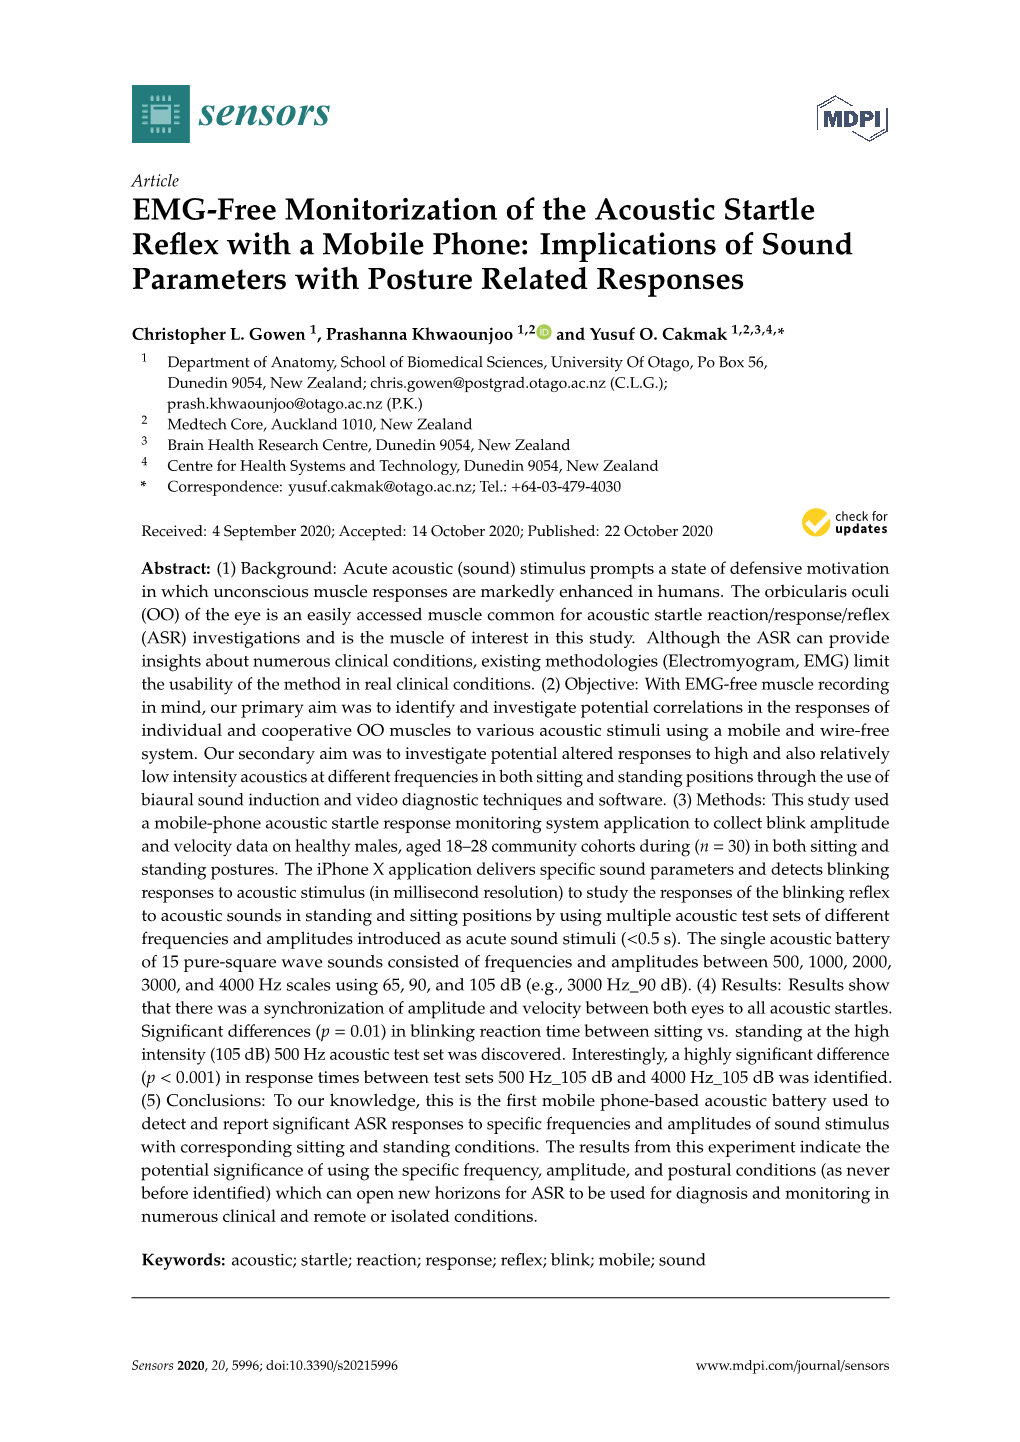 EMG-Free Monitorization of the Acoustic Startle Reflex with a Mobile Phone